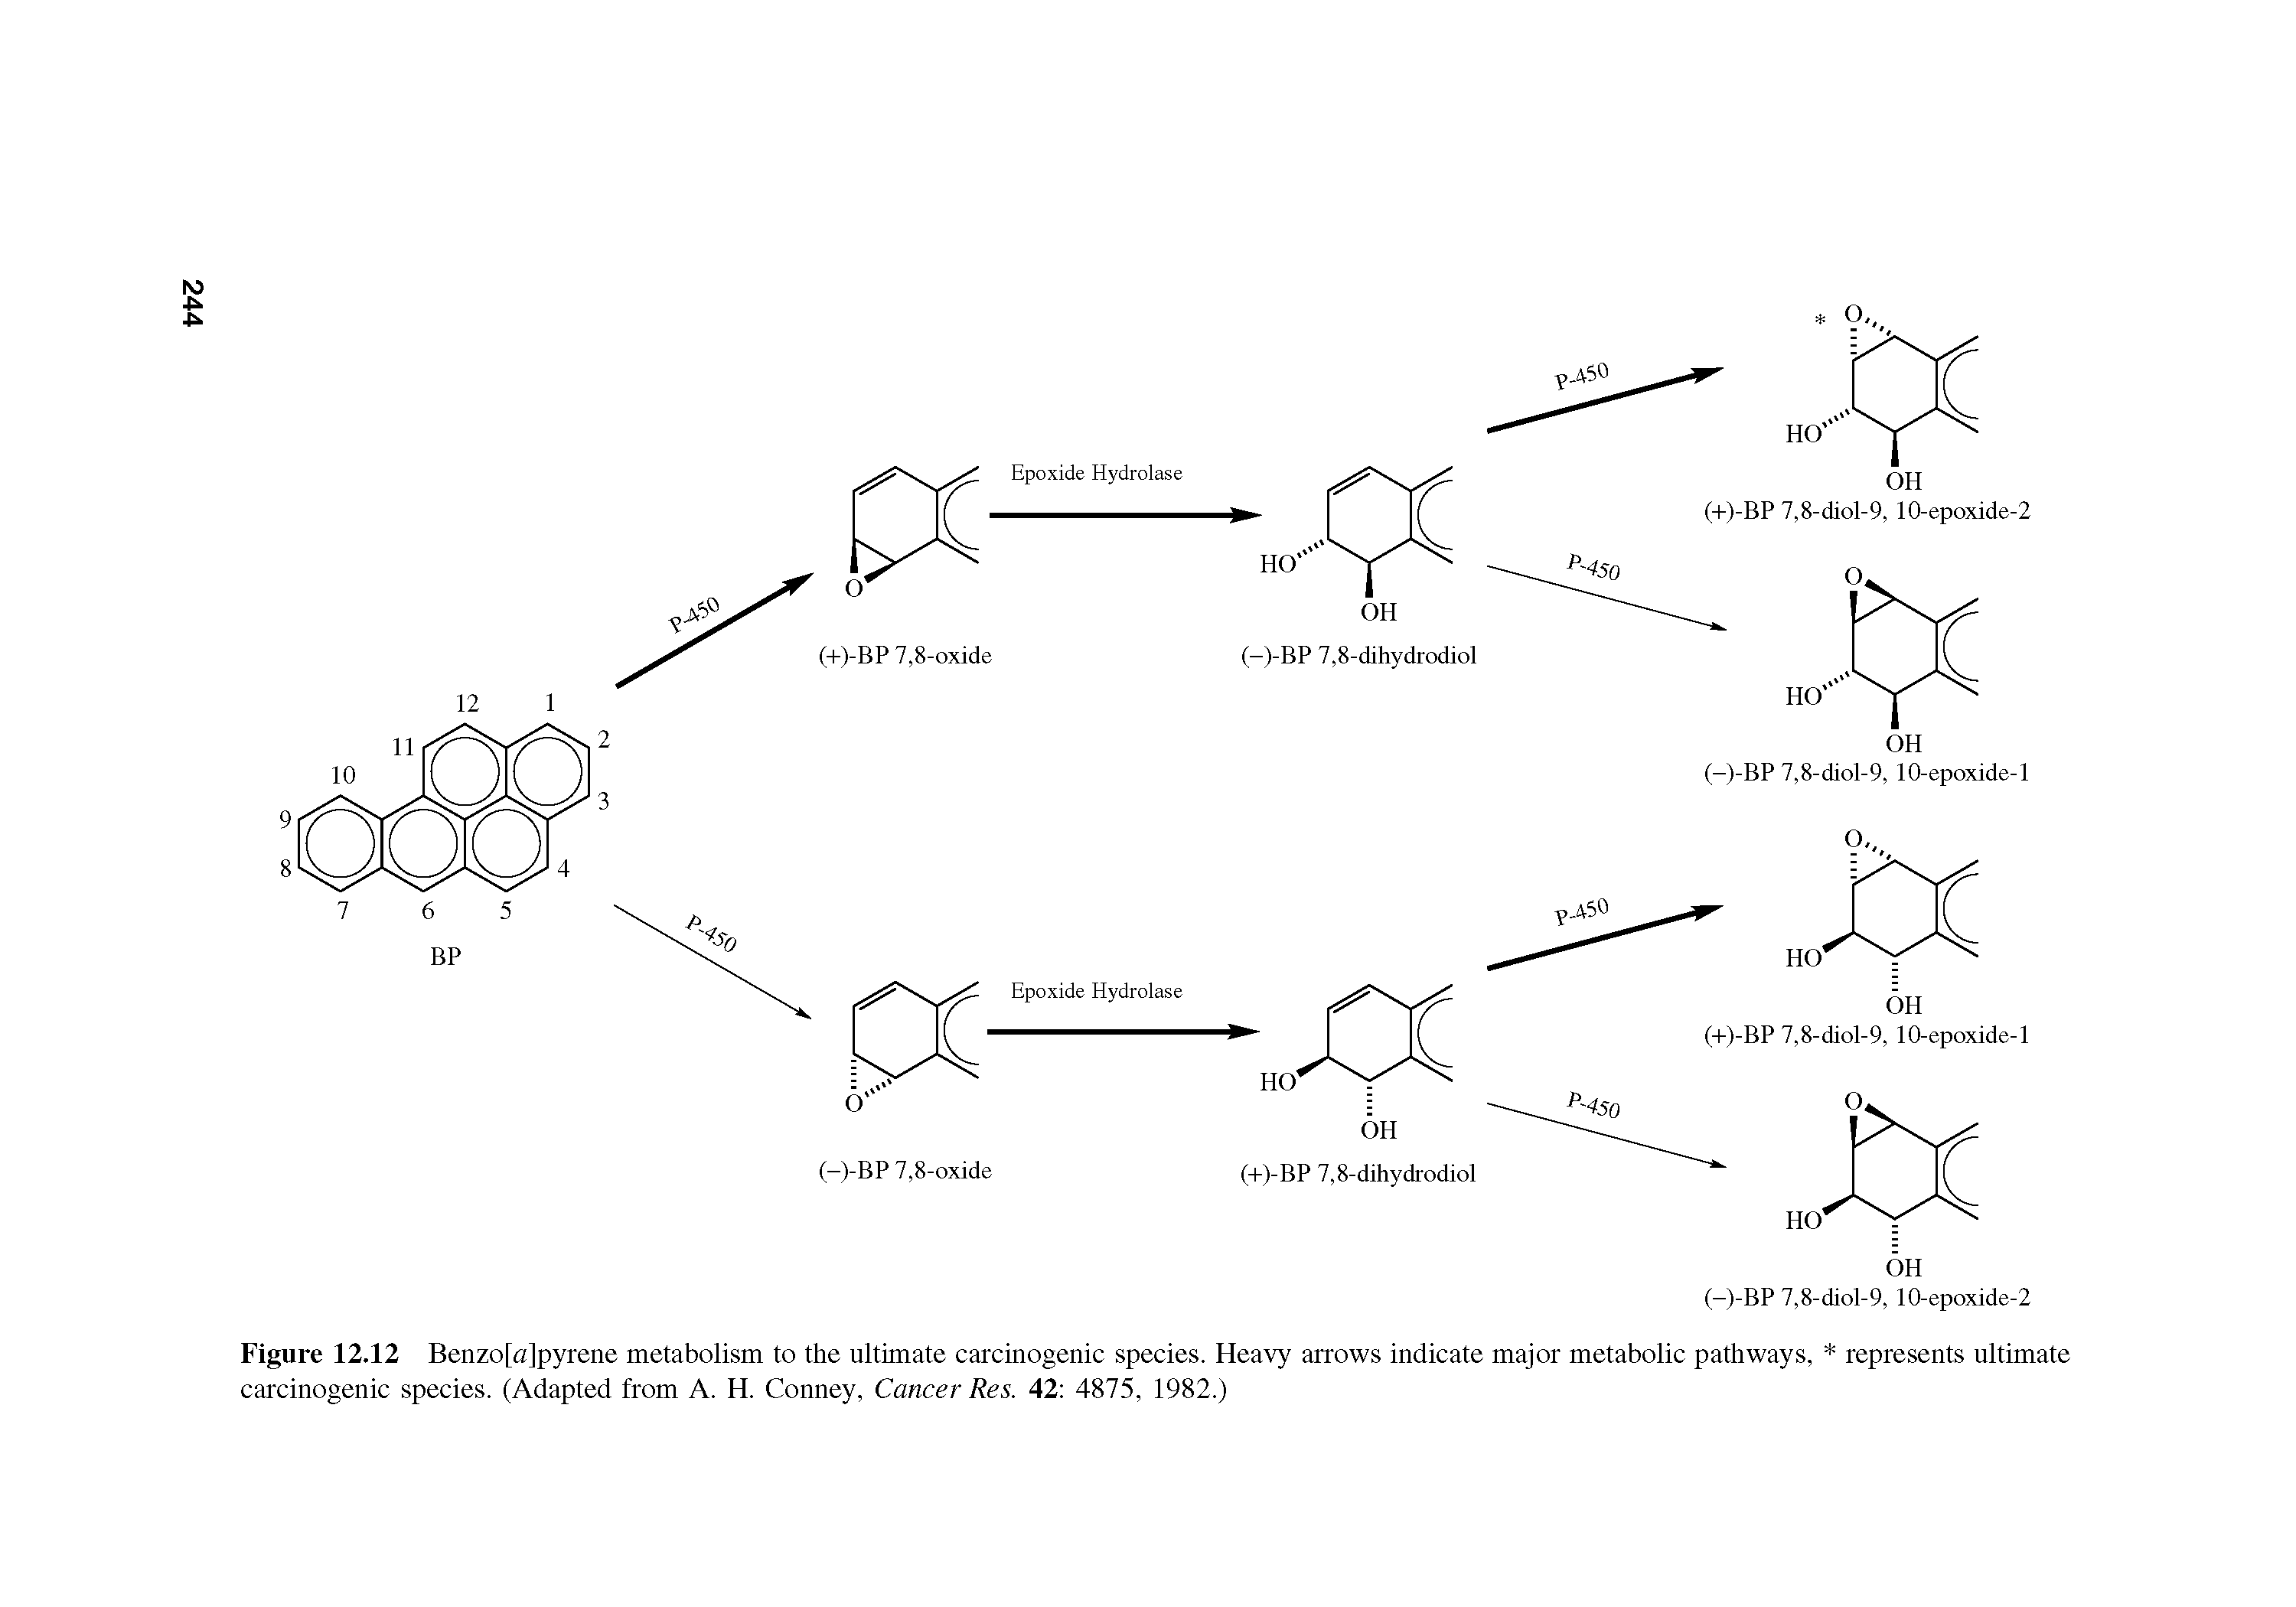 Figure 12.12 Benzo[a]pyrene metabolism to the ultimate carcinogenic species. Heavy arrows indicate major metabolic pathways, represents ultimate carcinogenic species. (Adapted from A. H. Conney, Cancer Res. 42 4875, 1982.)...